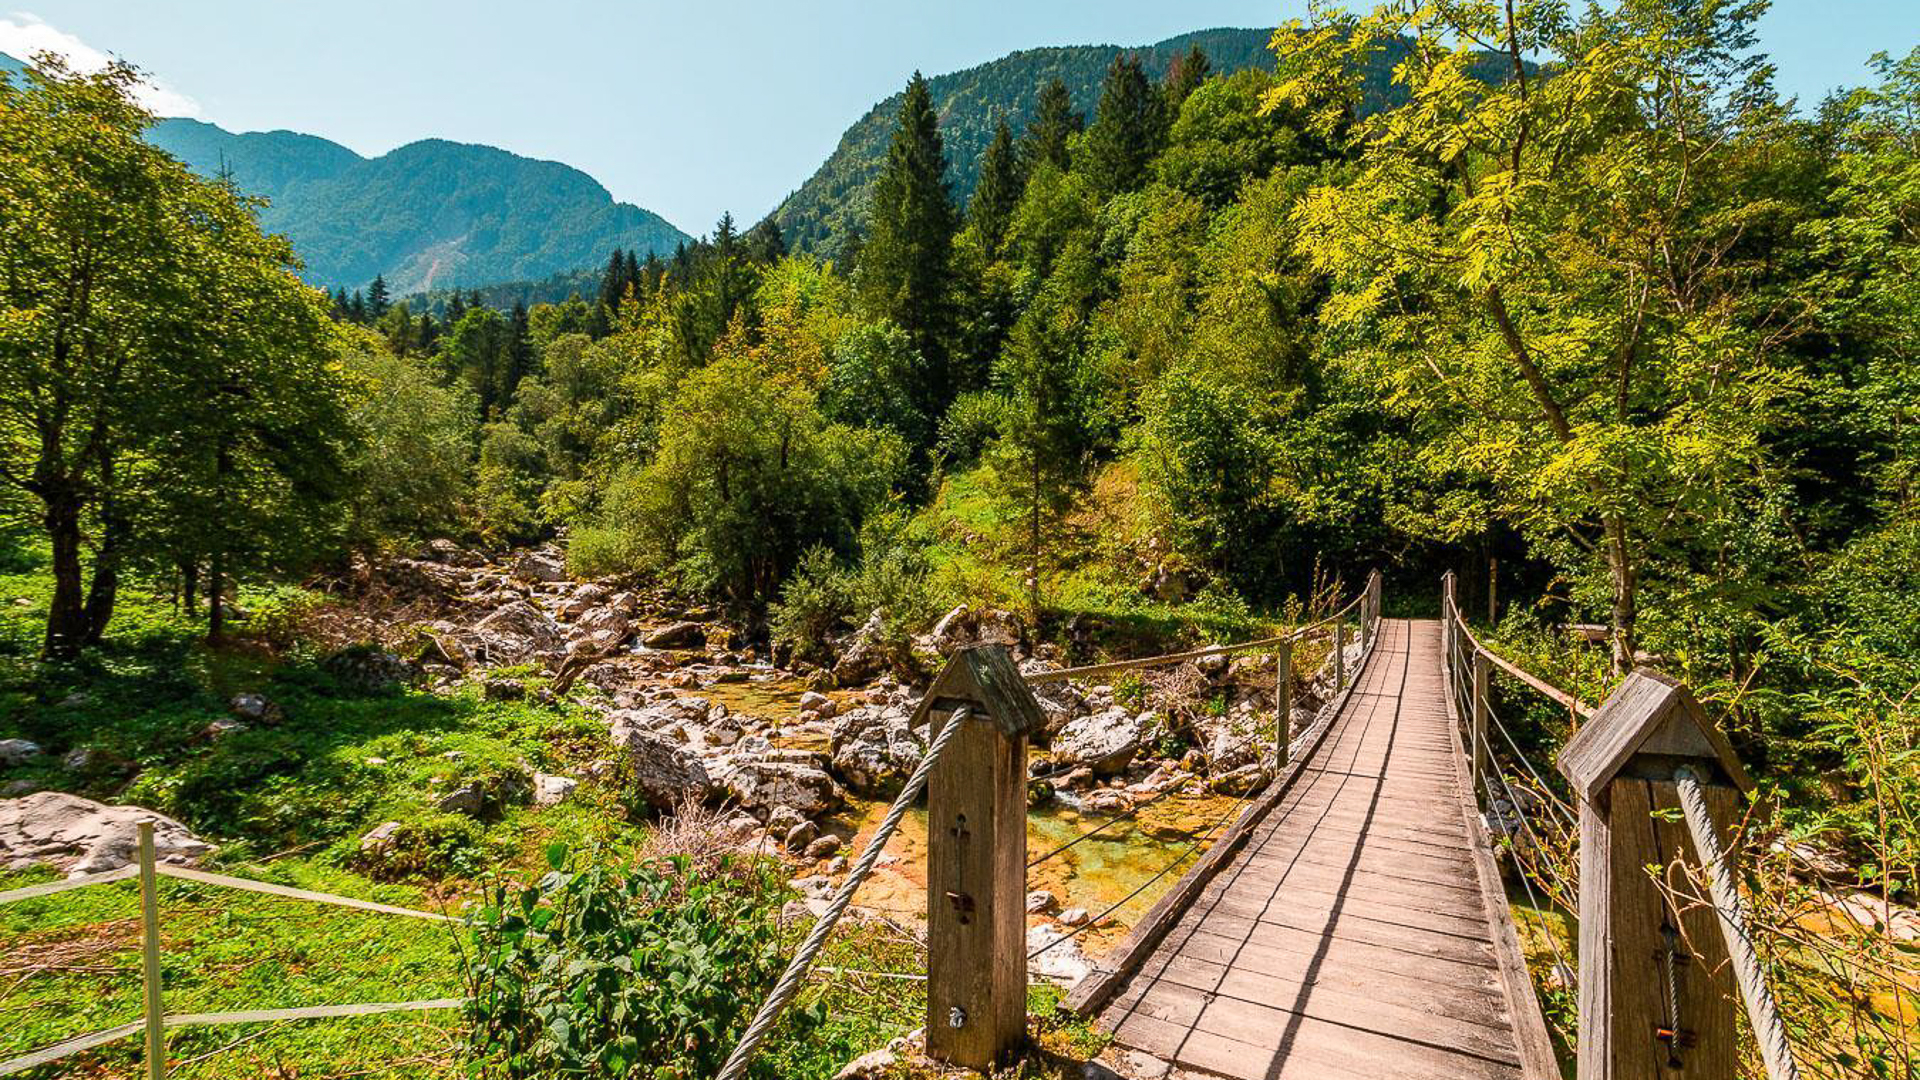 View of a national park in Soca Valley in Slovenia with a wooden suspension bridge on the right and mountains in the background. The scenery is fresh green and lush.